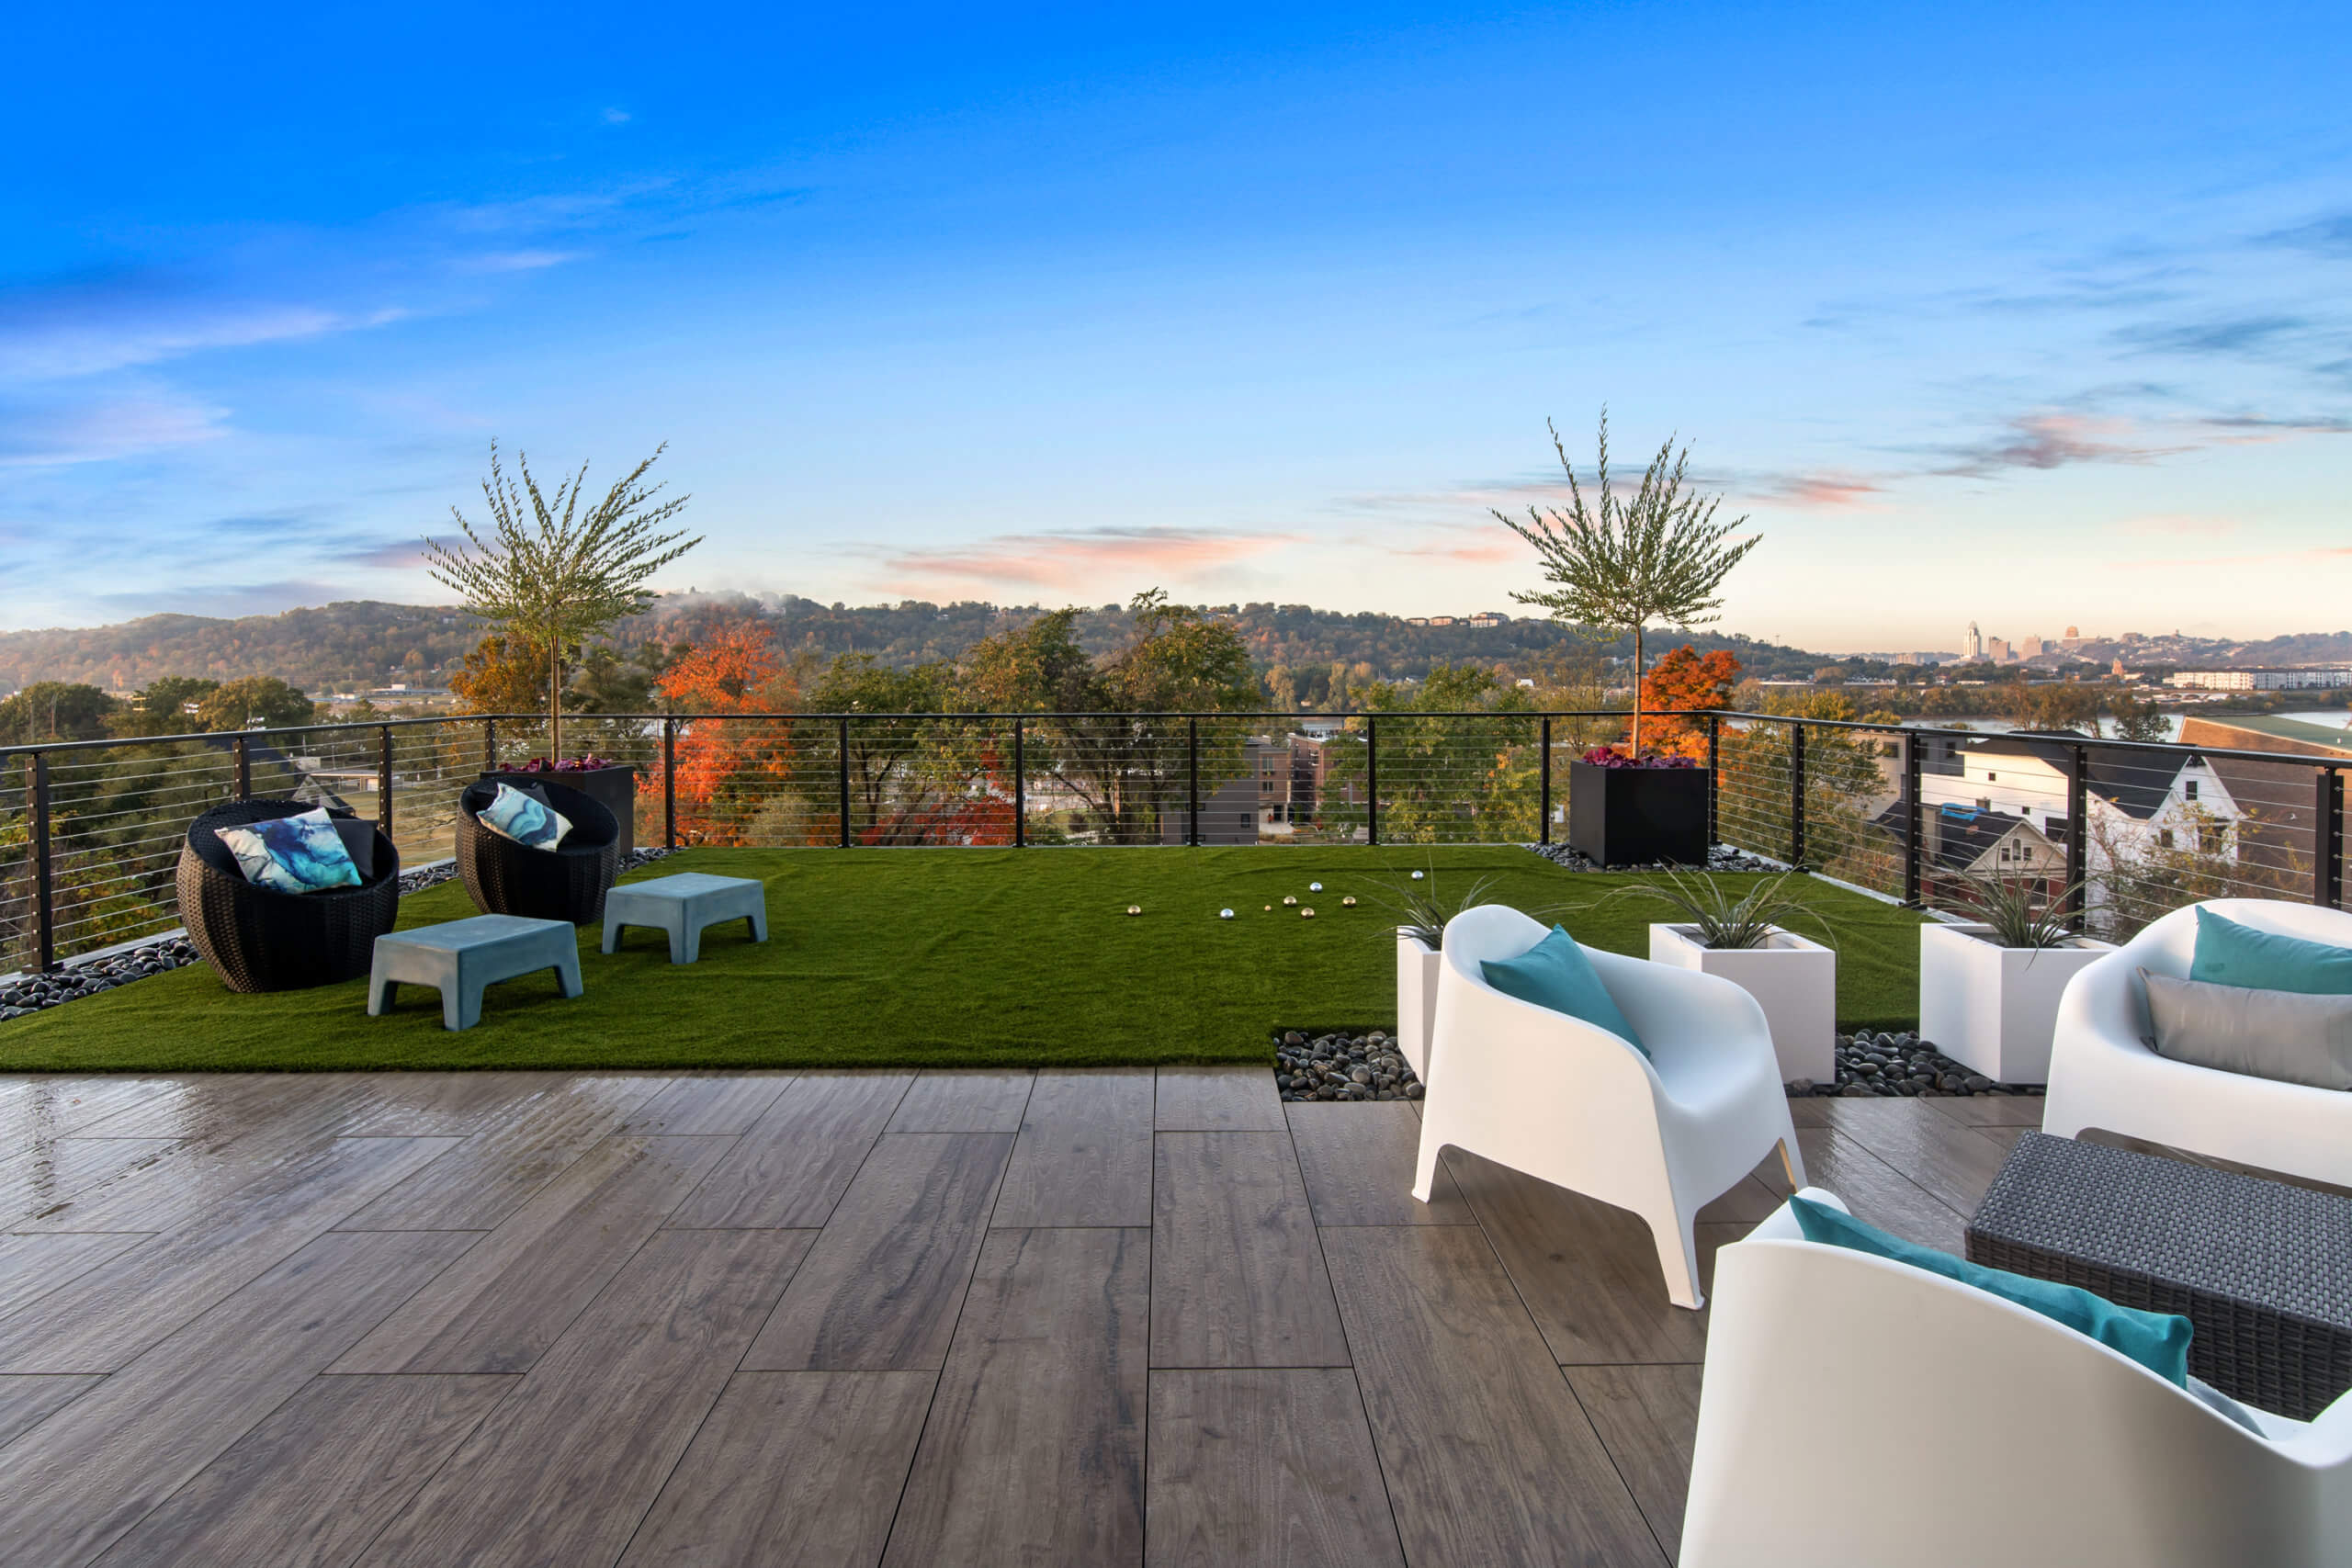 Rooftop patio with astroturf and tile. Designed by Cincinnati Interior Designer, RM Interiors.